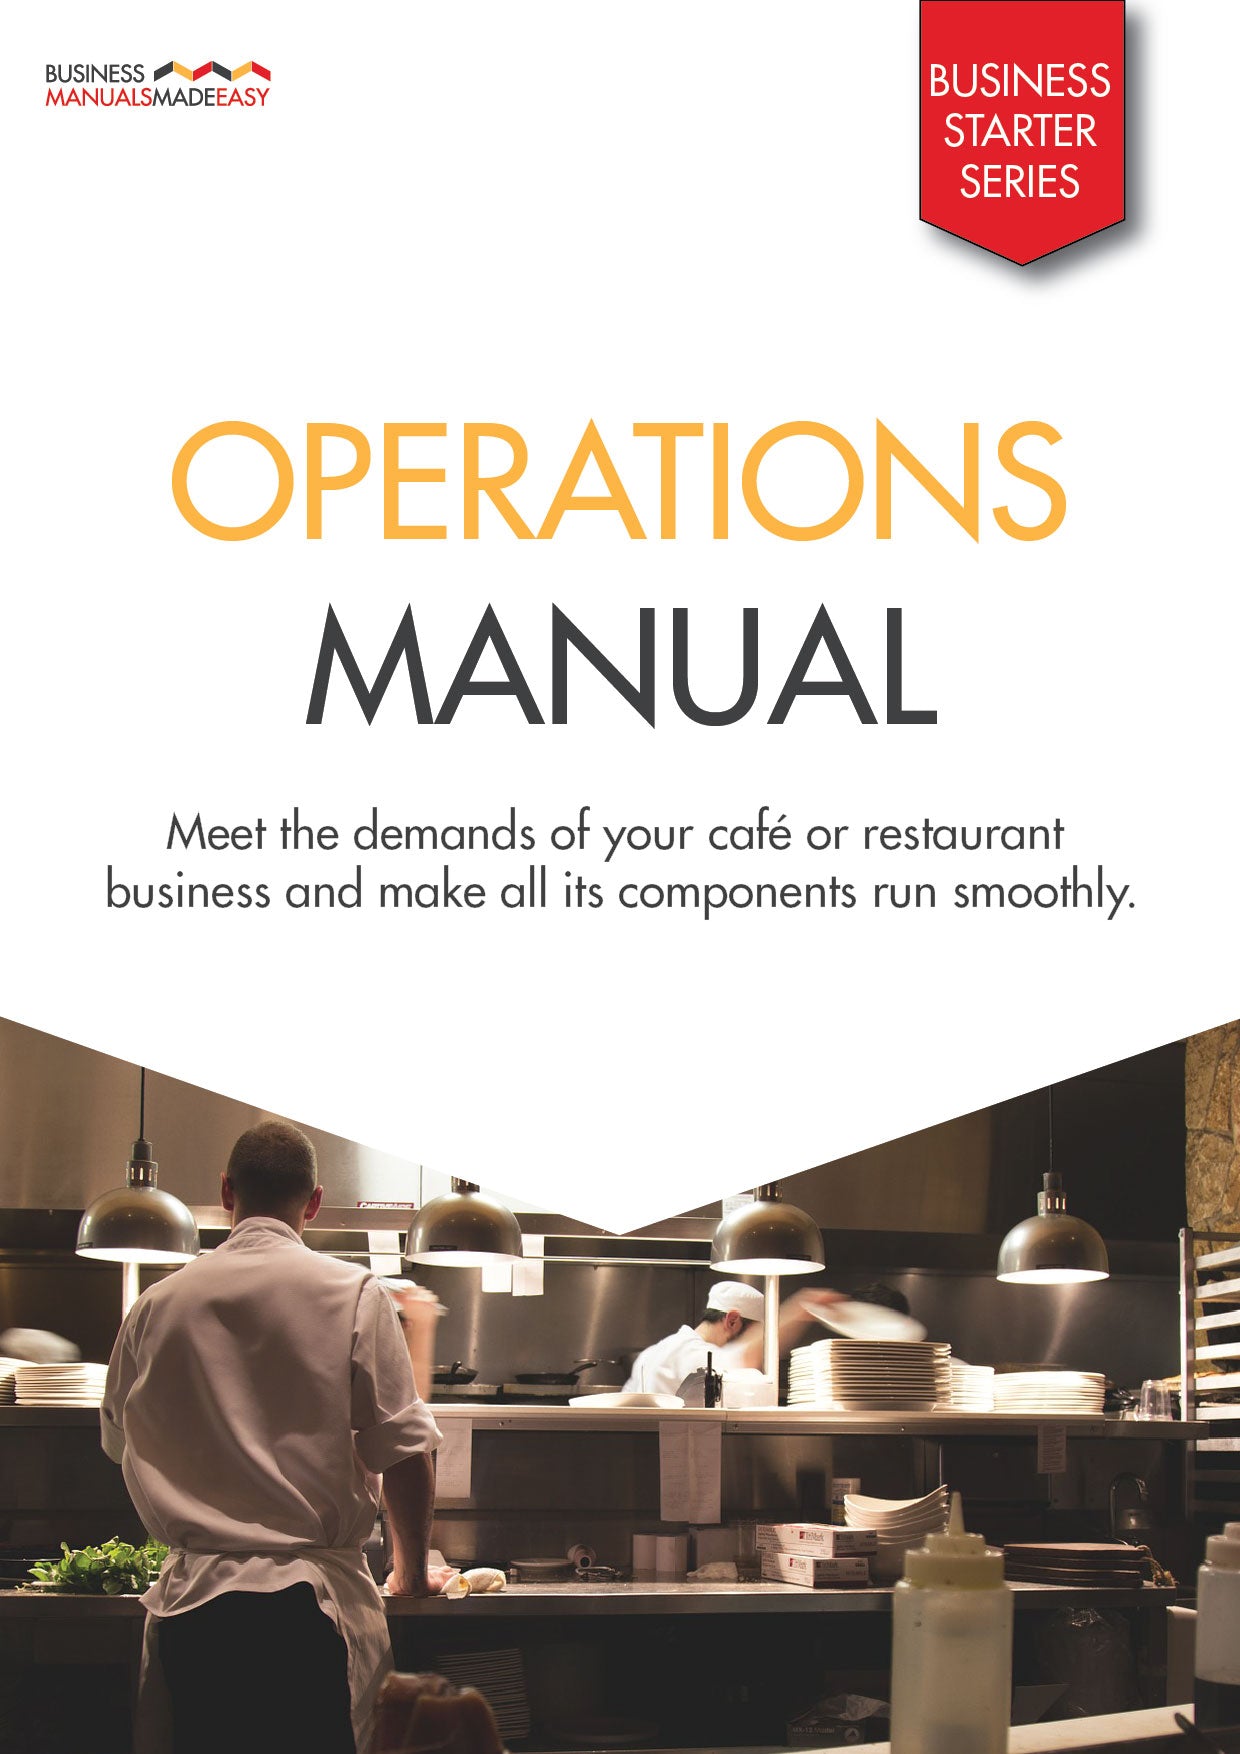 Business Manuals Made Easy: Operations Manual. This 65-page manual includes many checklists and procedures for hospitality operations. Benefits are food licence compliance, reduce risks and hazards, make ready task lists and checklists, standard procedures for delegation, consistency and expectation of tasks reducing staffing costs and time & food wastage.